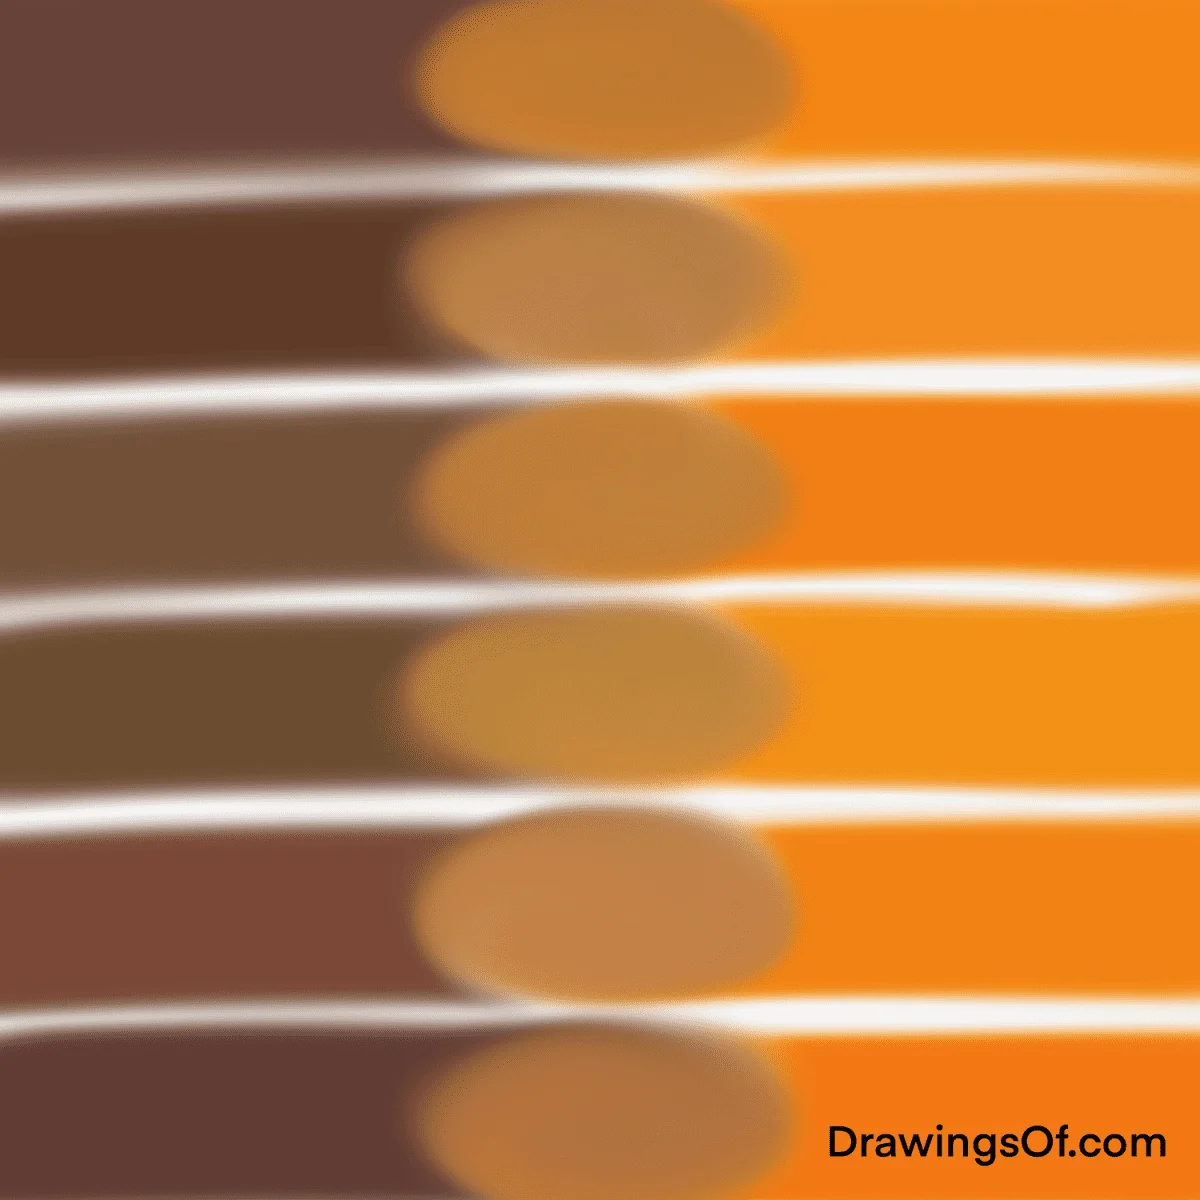 Orange and brown make what color?